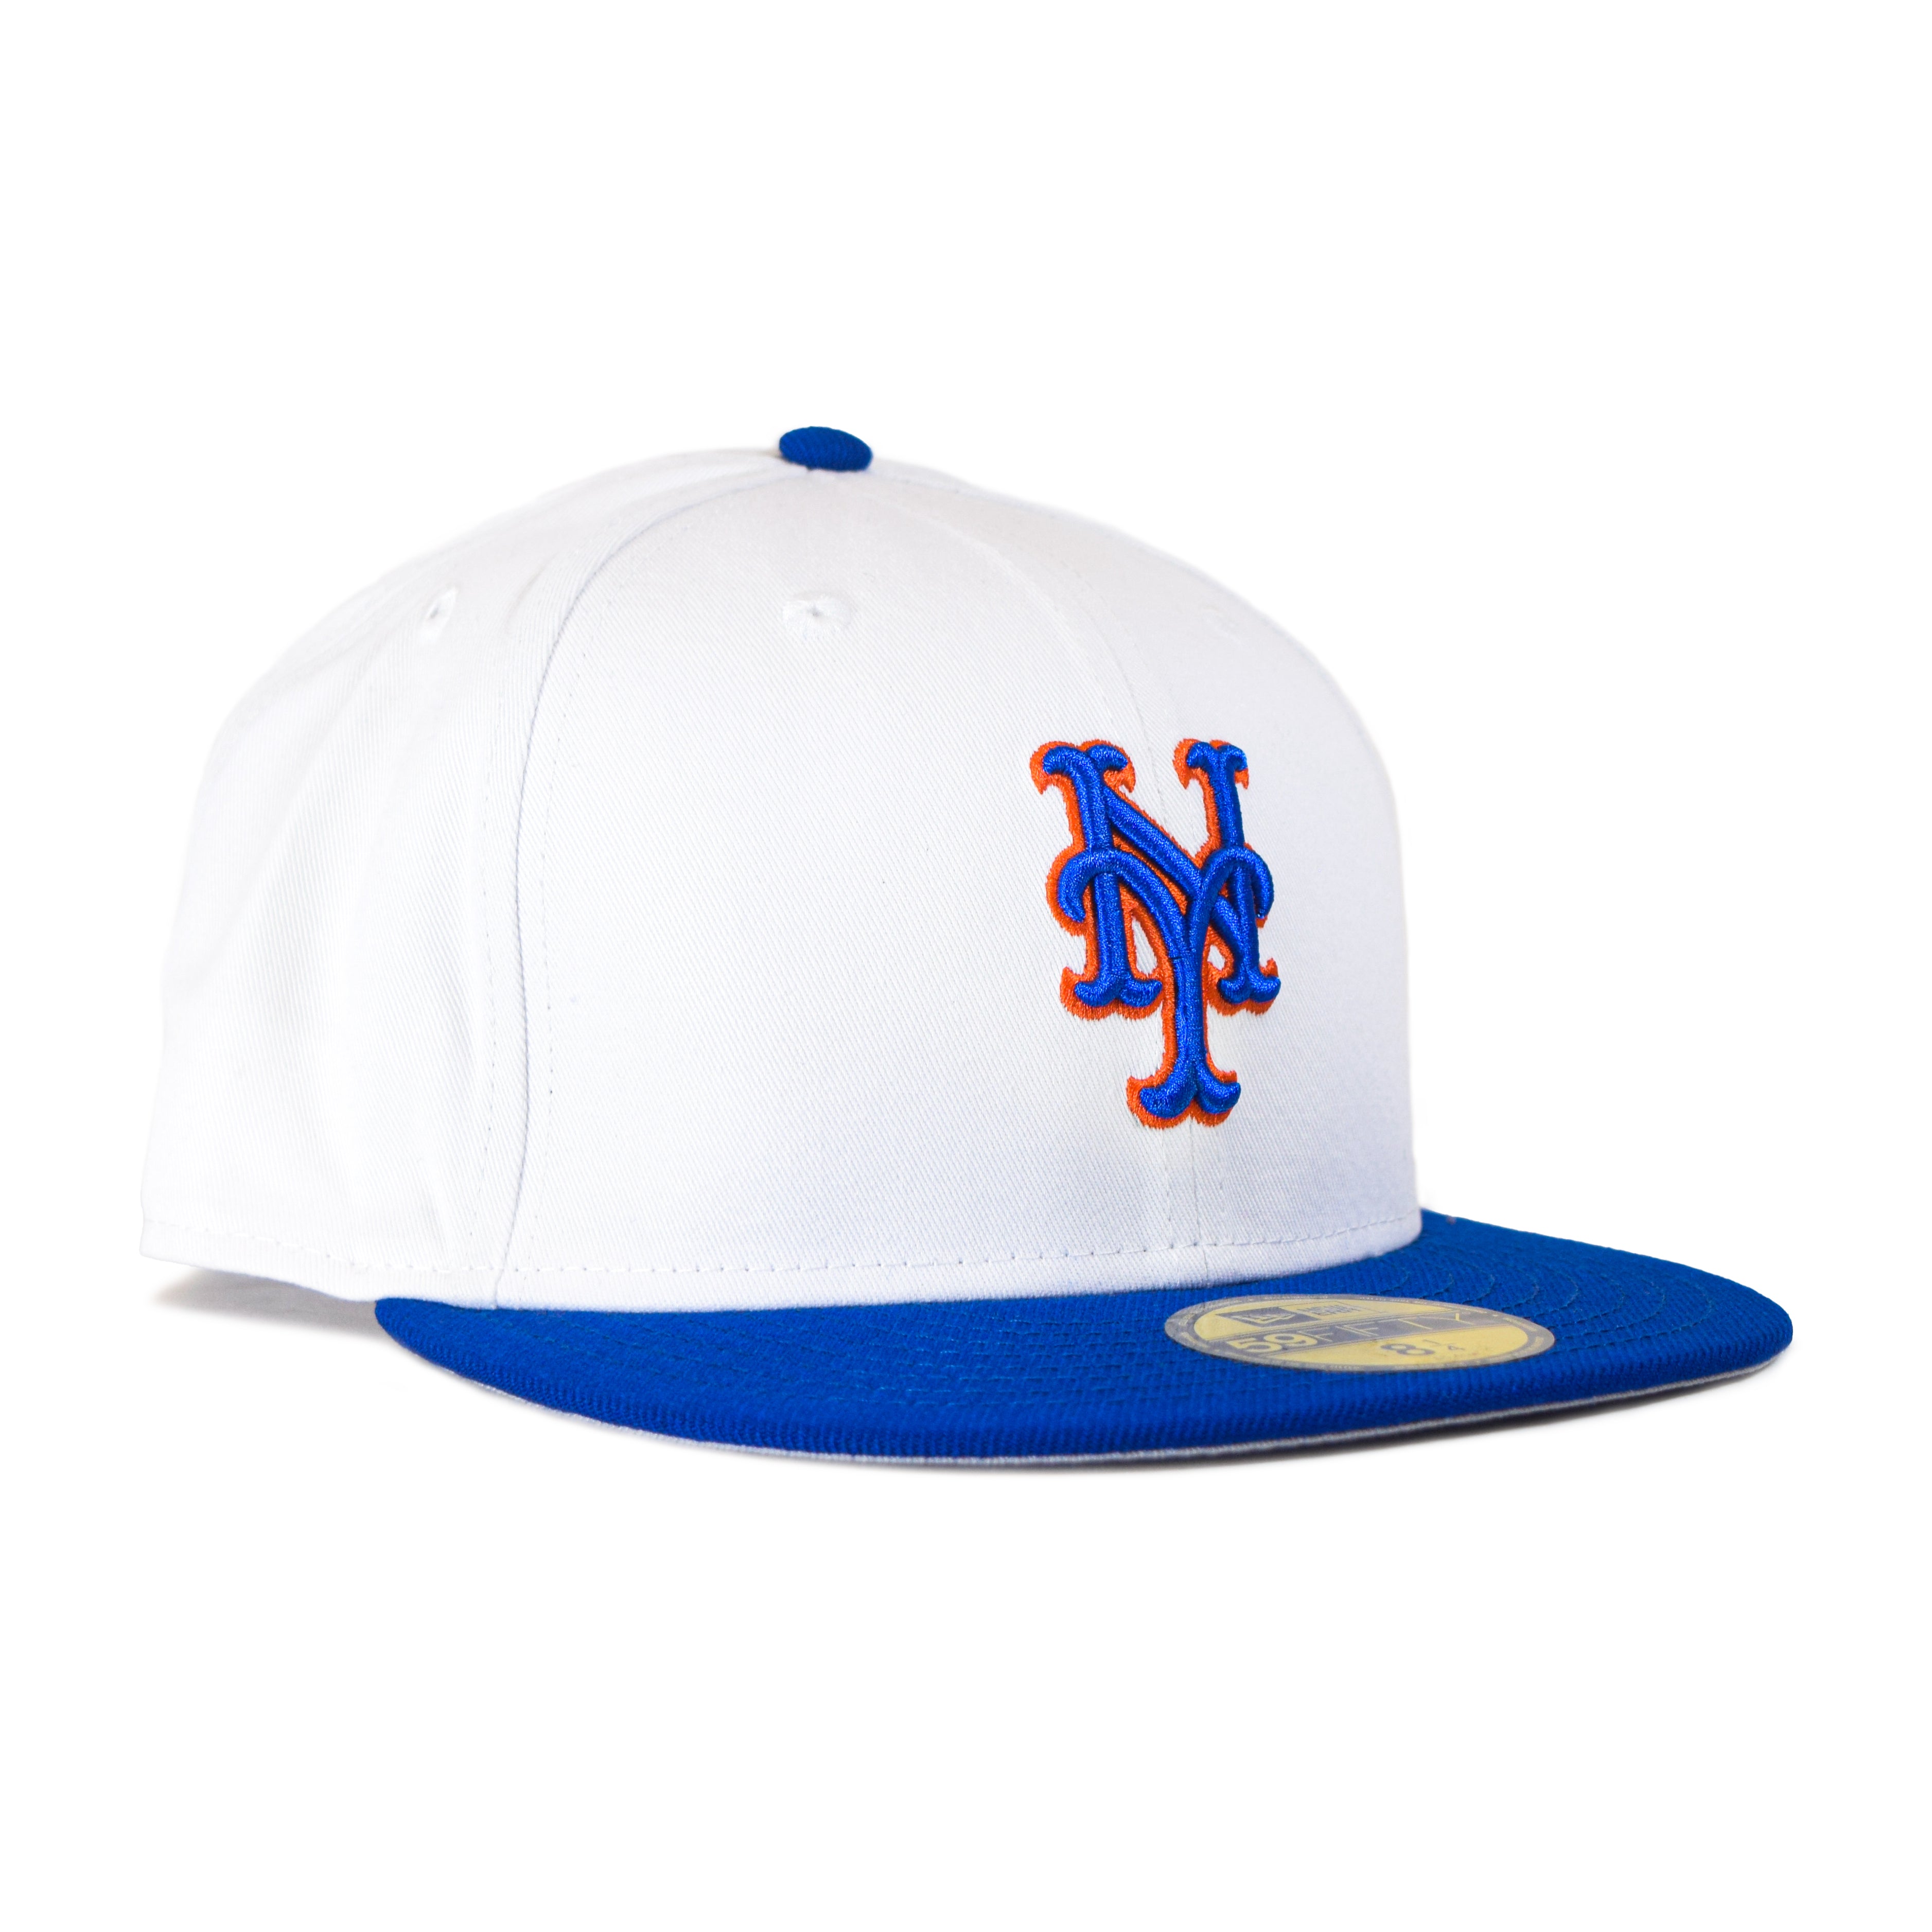 New York Mets MLB Side Split Blue 59FIFTY Fitted Cap